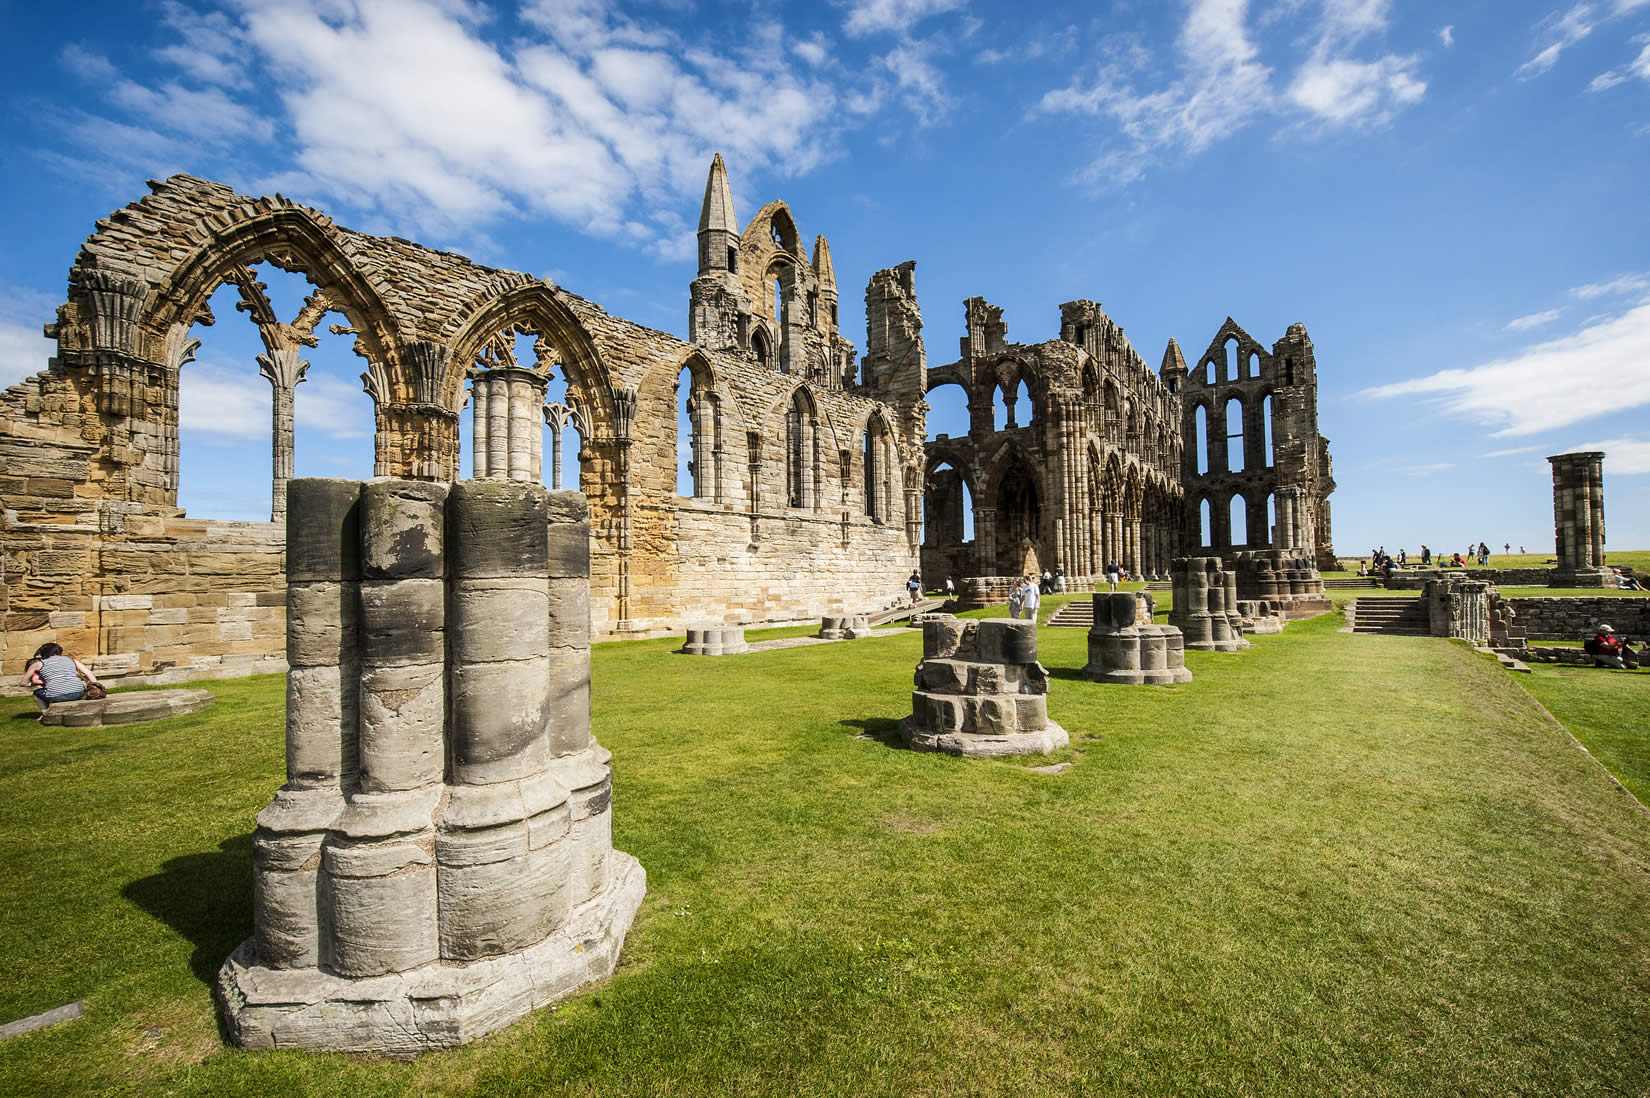 Image name Whitby Abbey the 6 image from the post Visitor Attractions in Yorkshire.com.